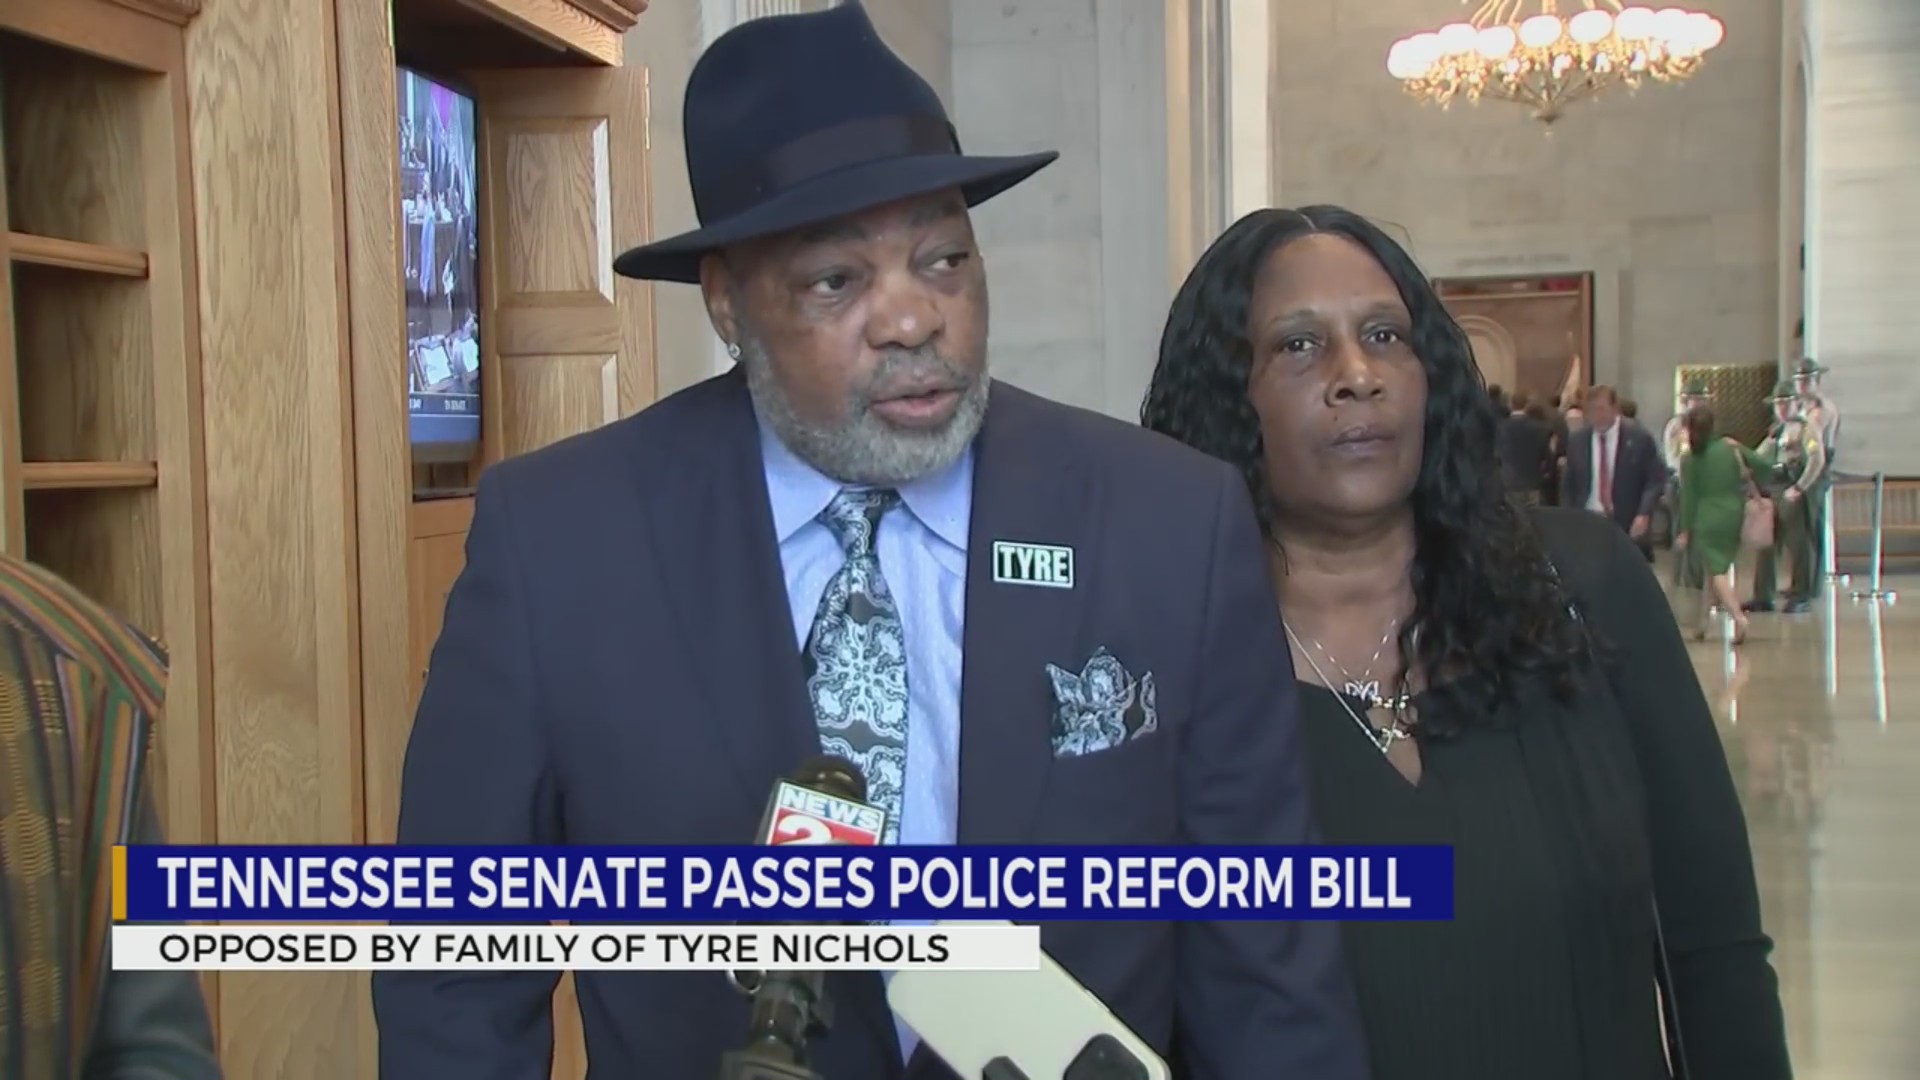 Tennessee Senate passes police reform bill opposed by Tyre Nichols' family